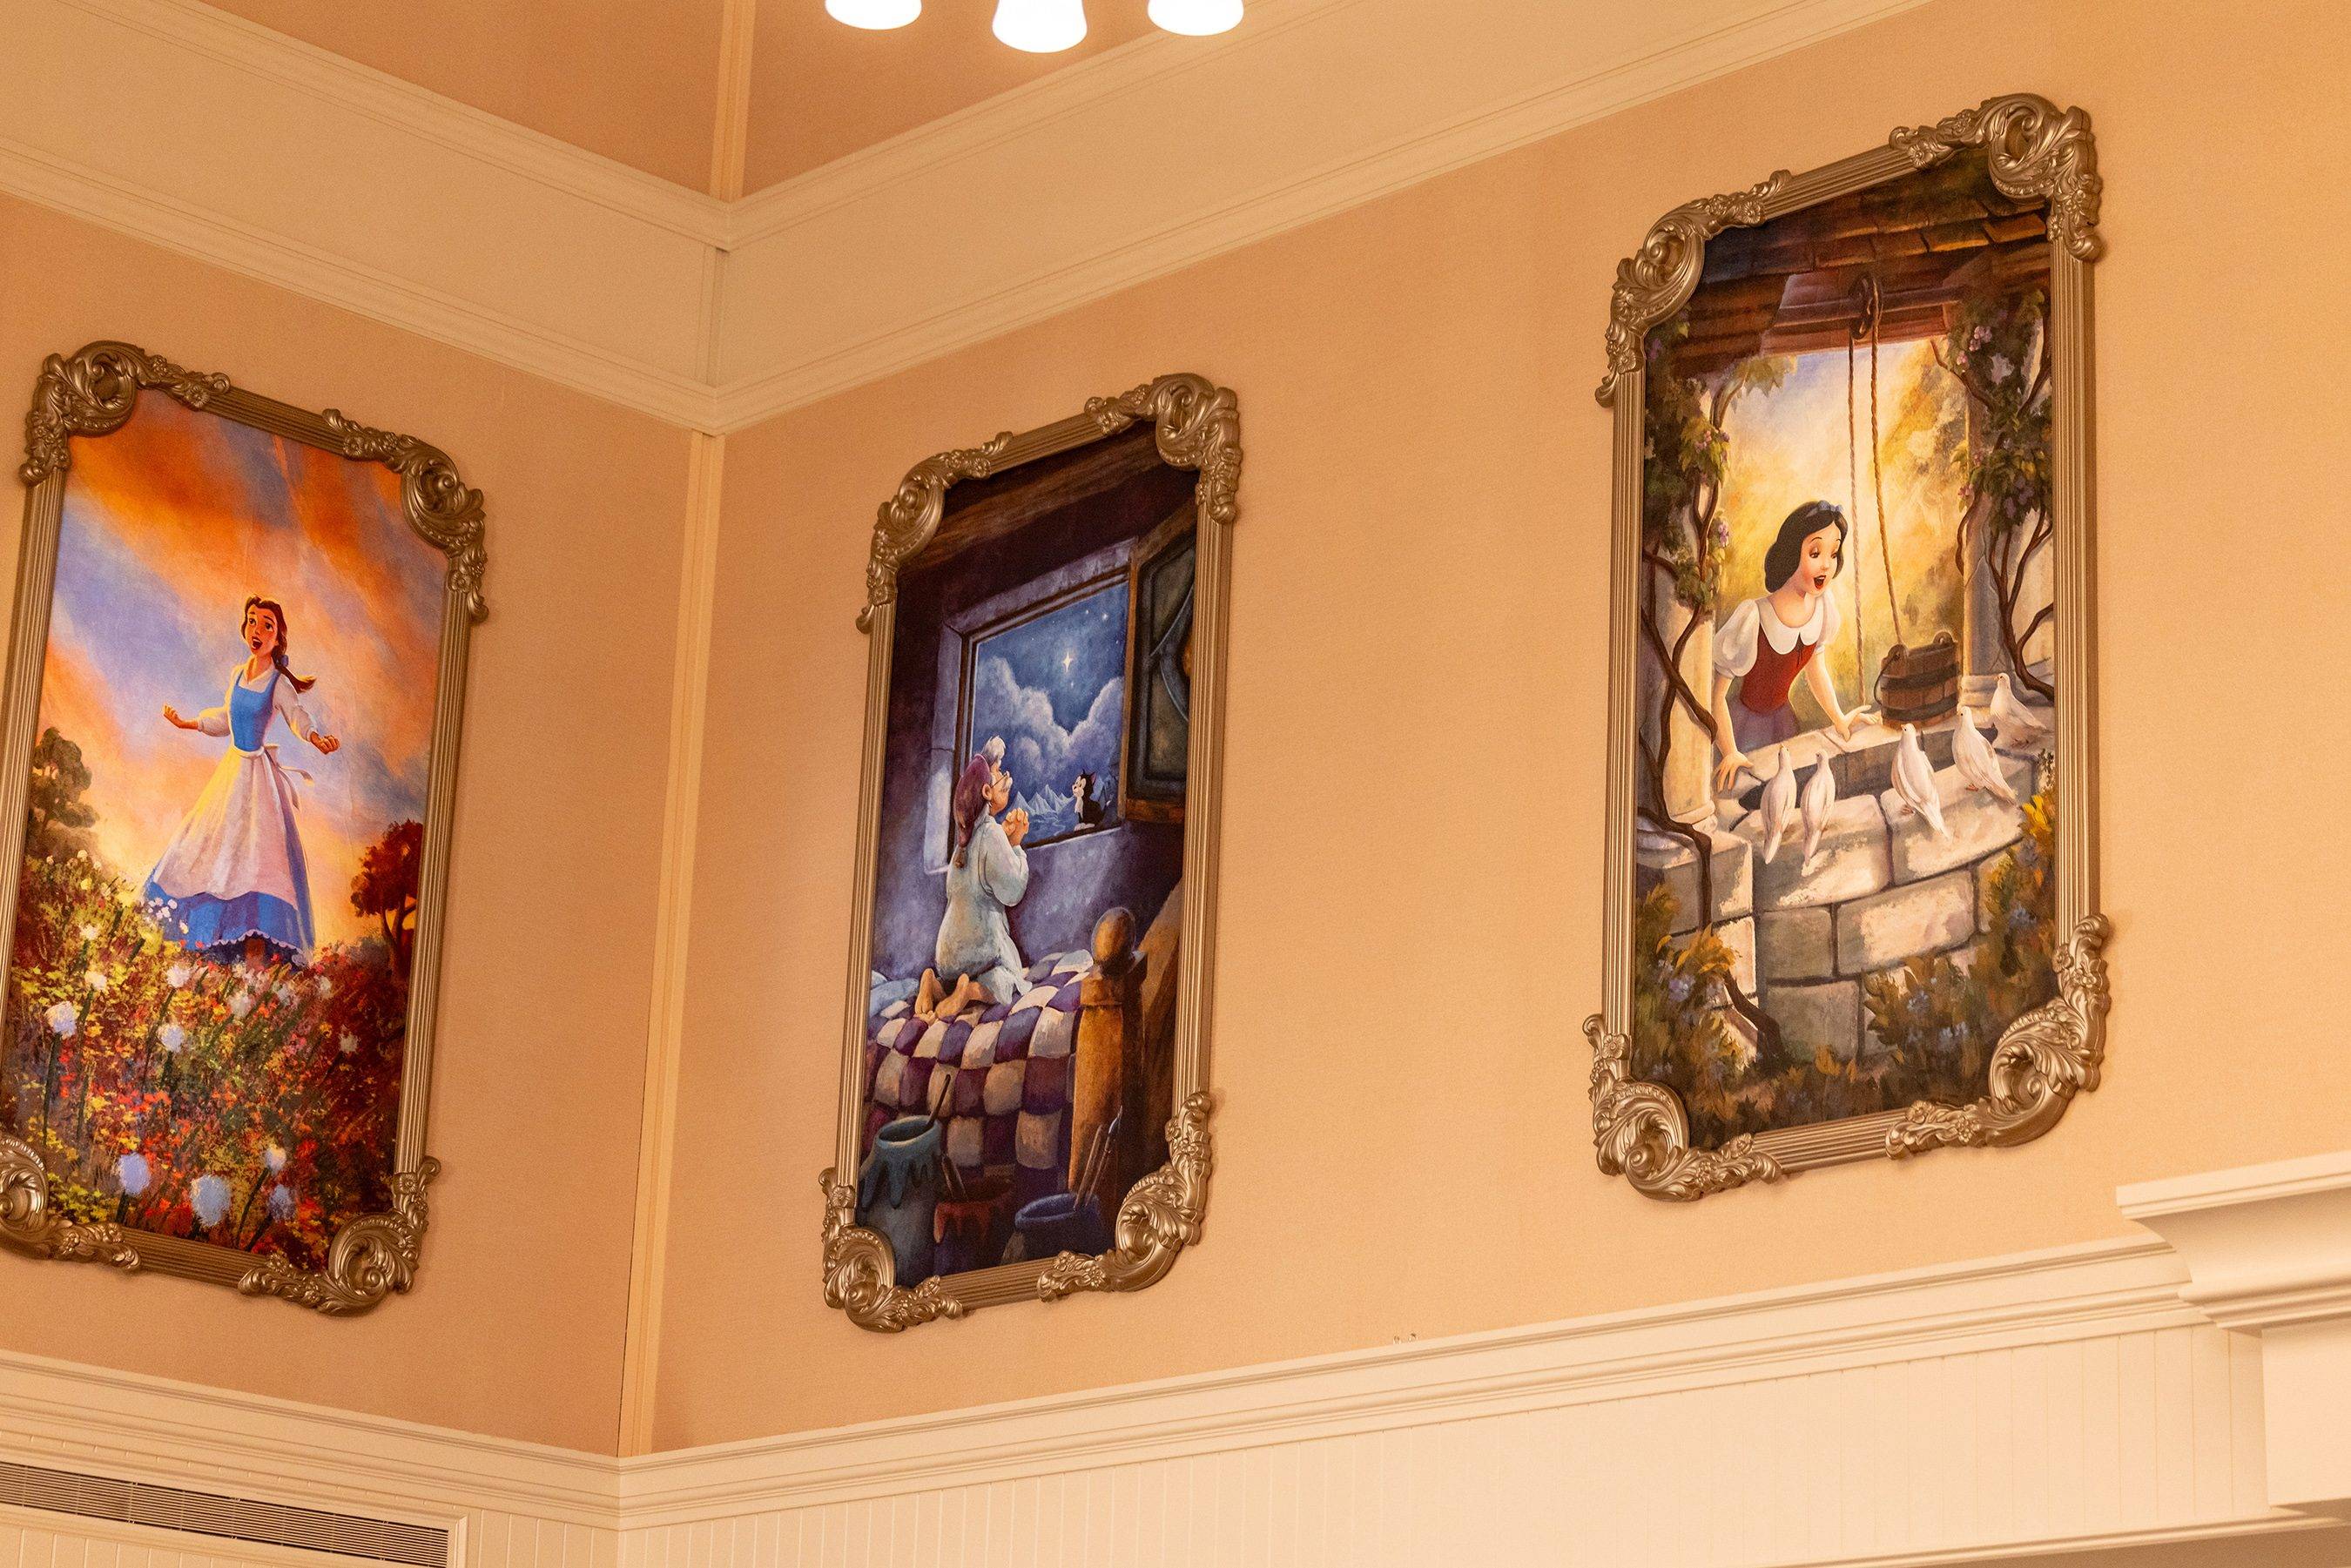 Preview of new-look 1900 Park Fare restaurant